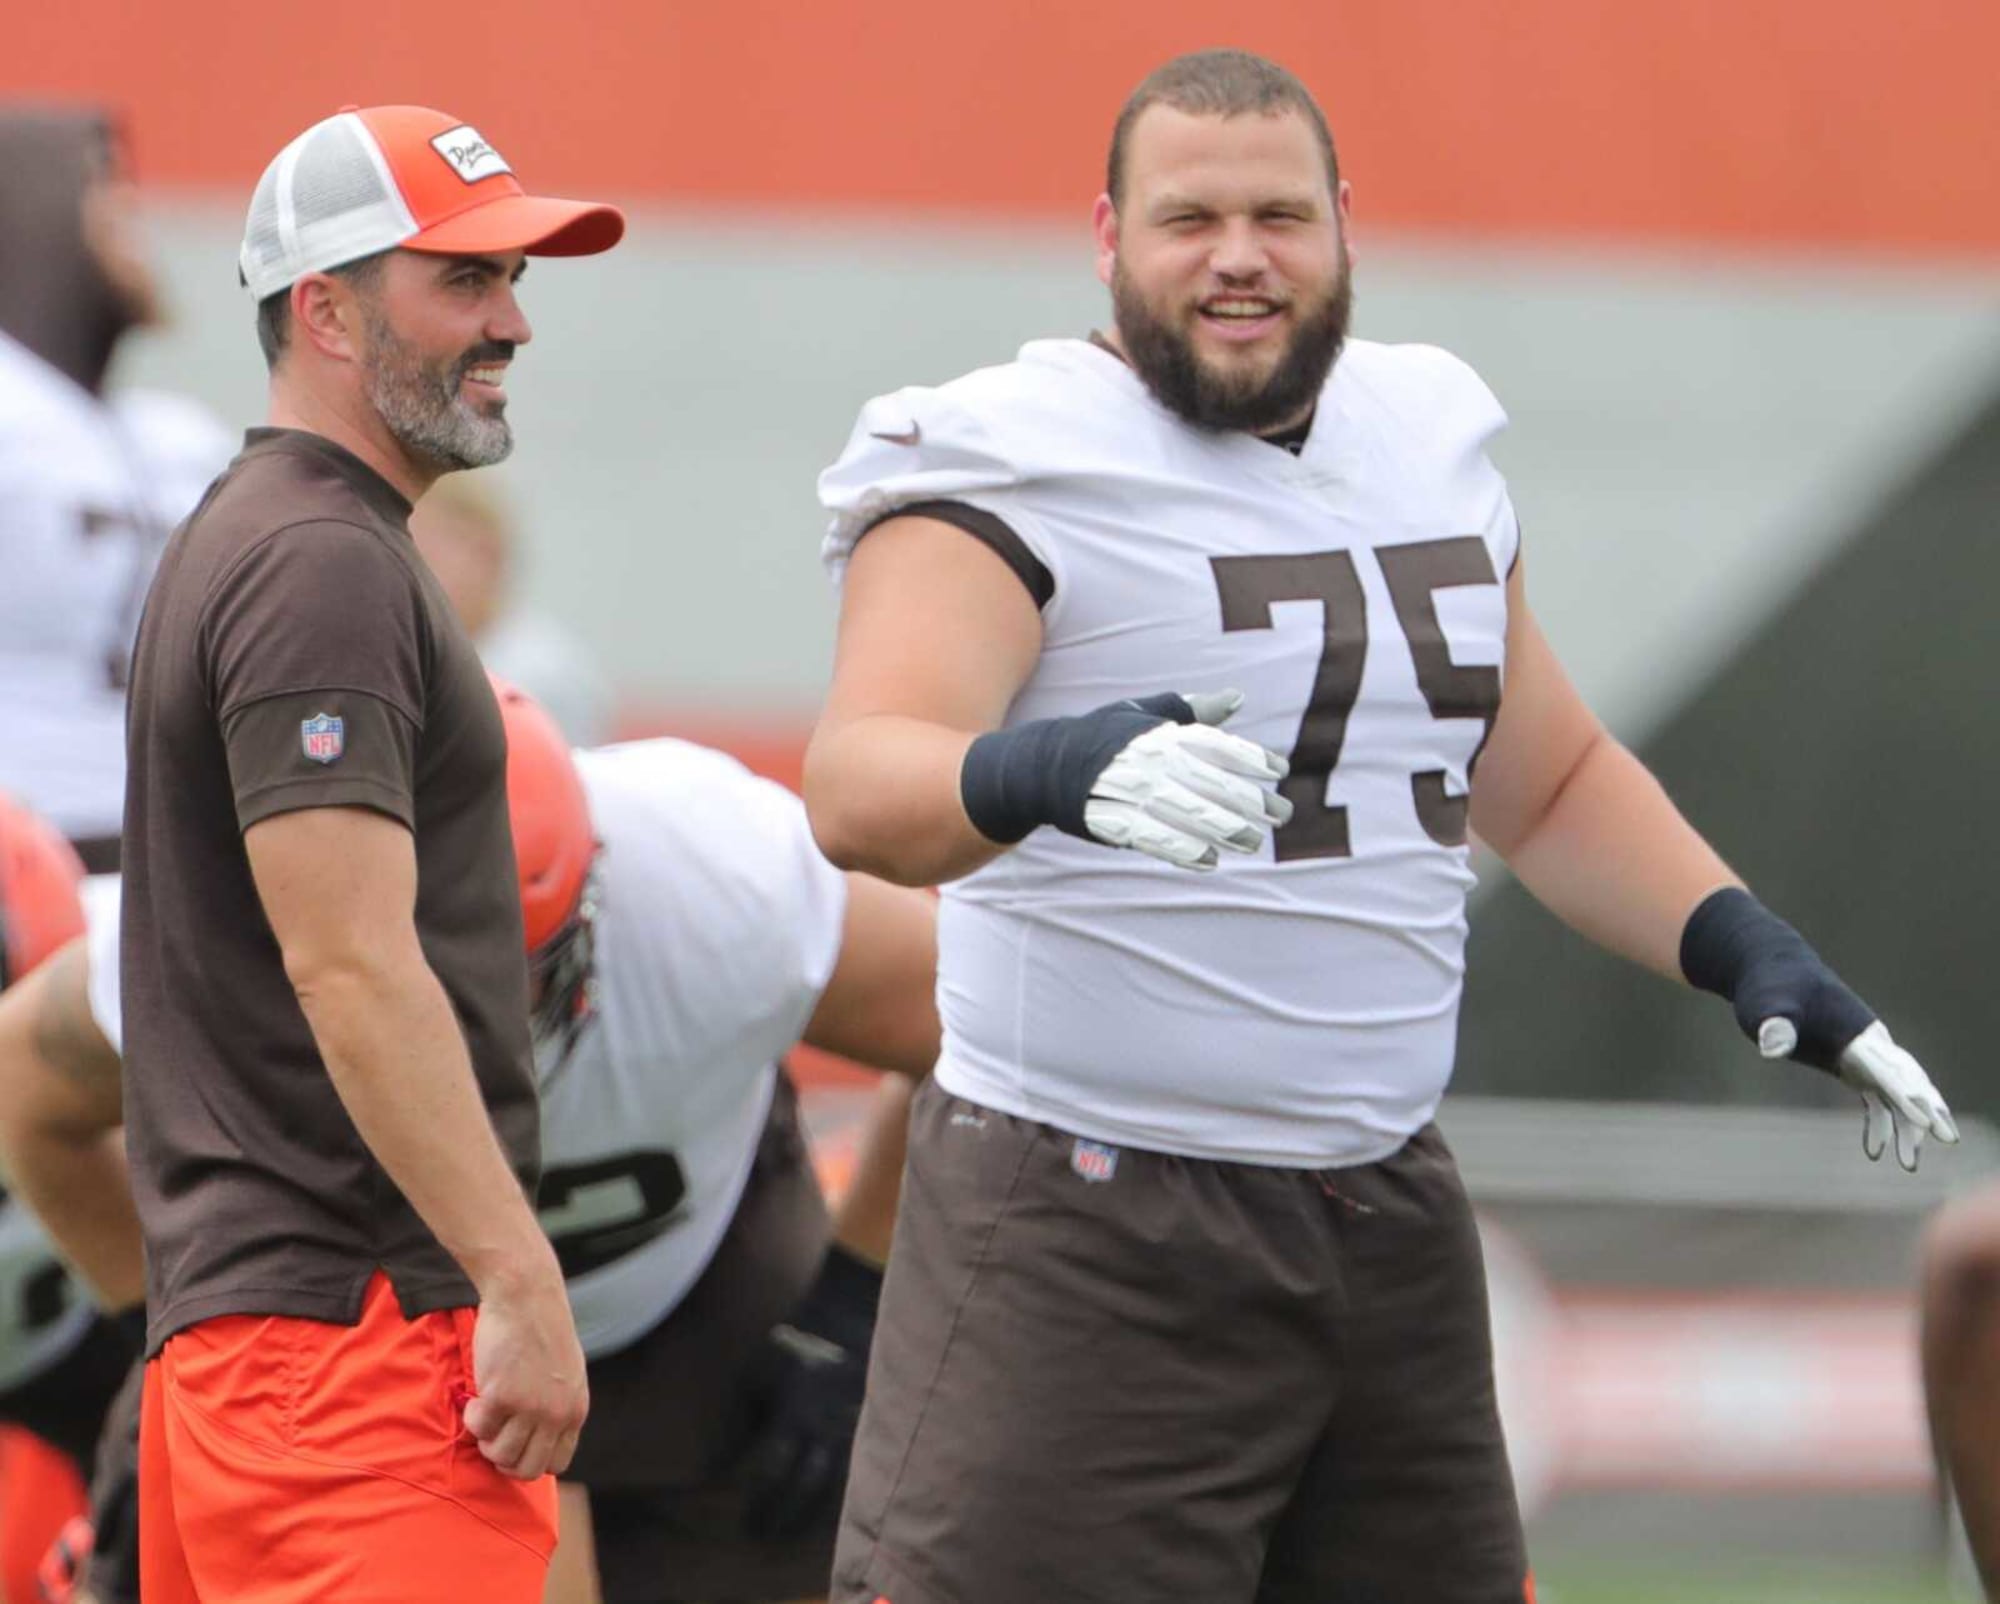 PFF thinks Joel Bitonio is the best O-linemen on the team, but is he?